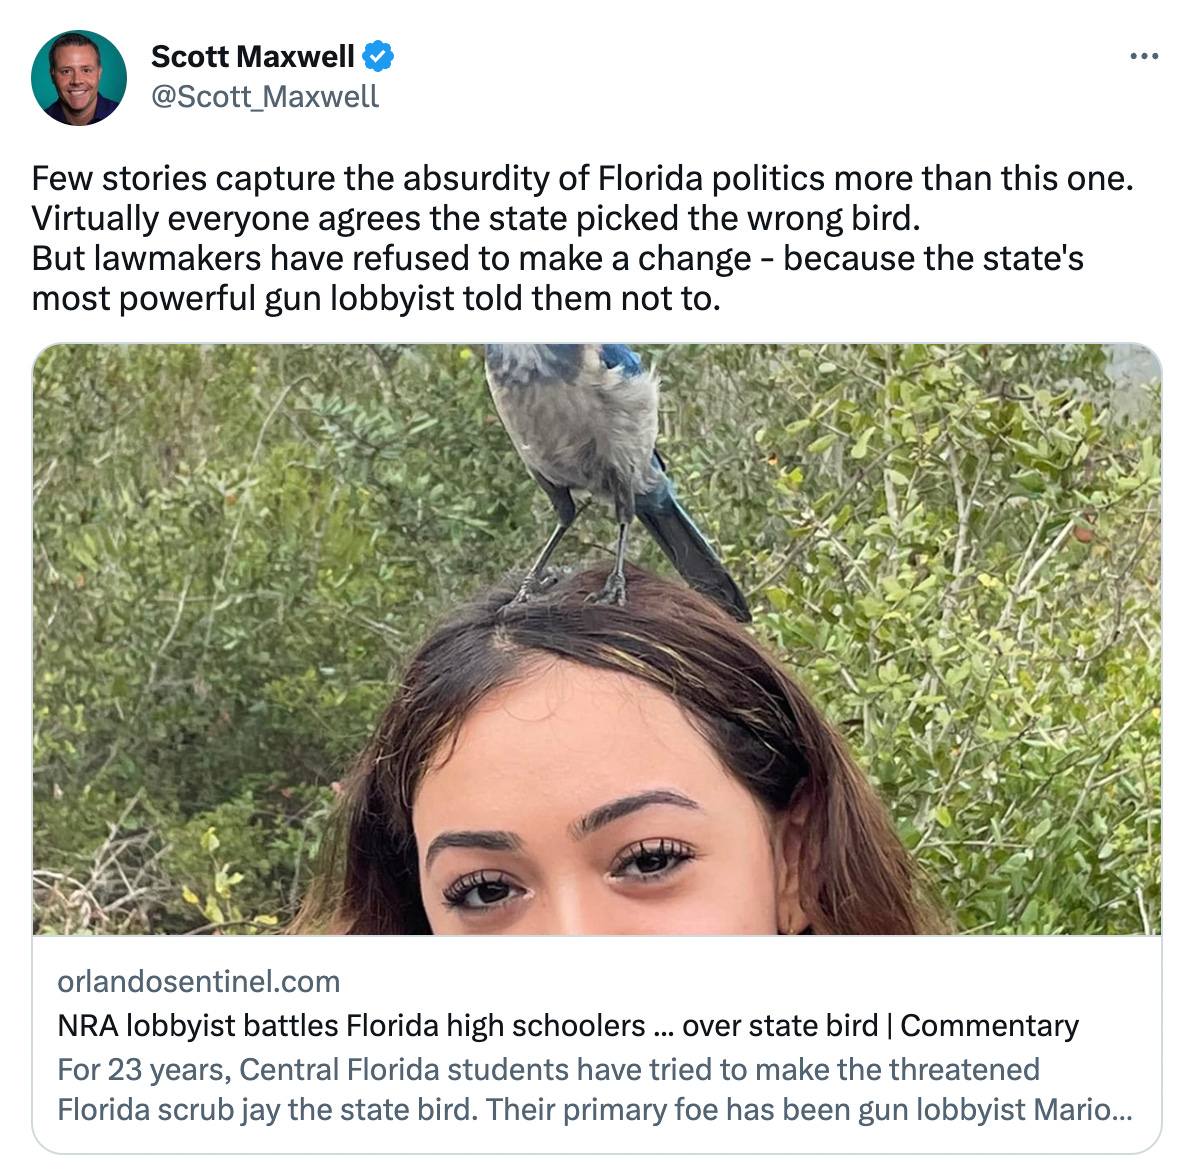 Screenshot of a tweet from Scott Maxwell that reads: "Few stories capture the absurdity of Florida politics more than this one. Virtually everyone agrees the state picked the wrong bird. But lawmakers have refused to make a change - because the state's most powerful gun lobbyist told them not to." and a link to an Orlando Sentinel story titled "NRA lobbyist battles Florida high schoolers...over state bird."